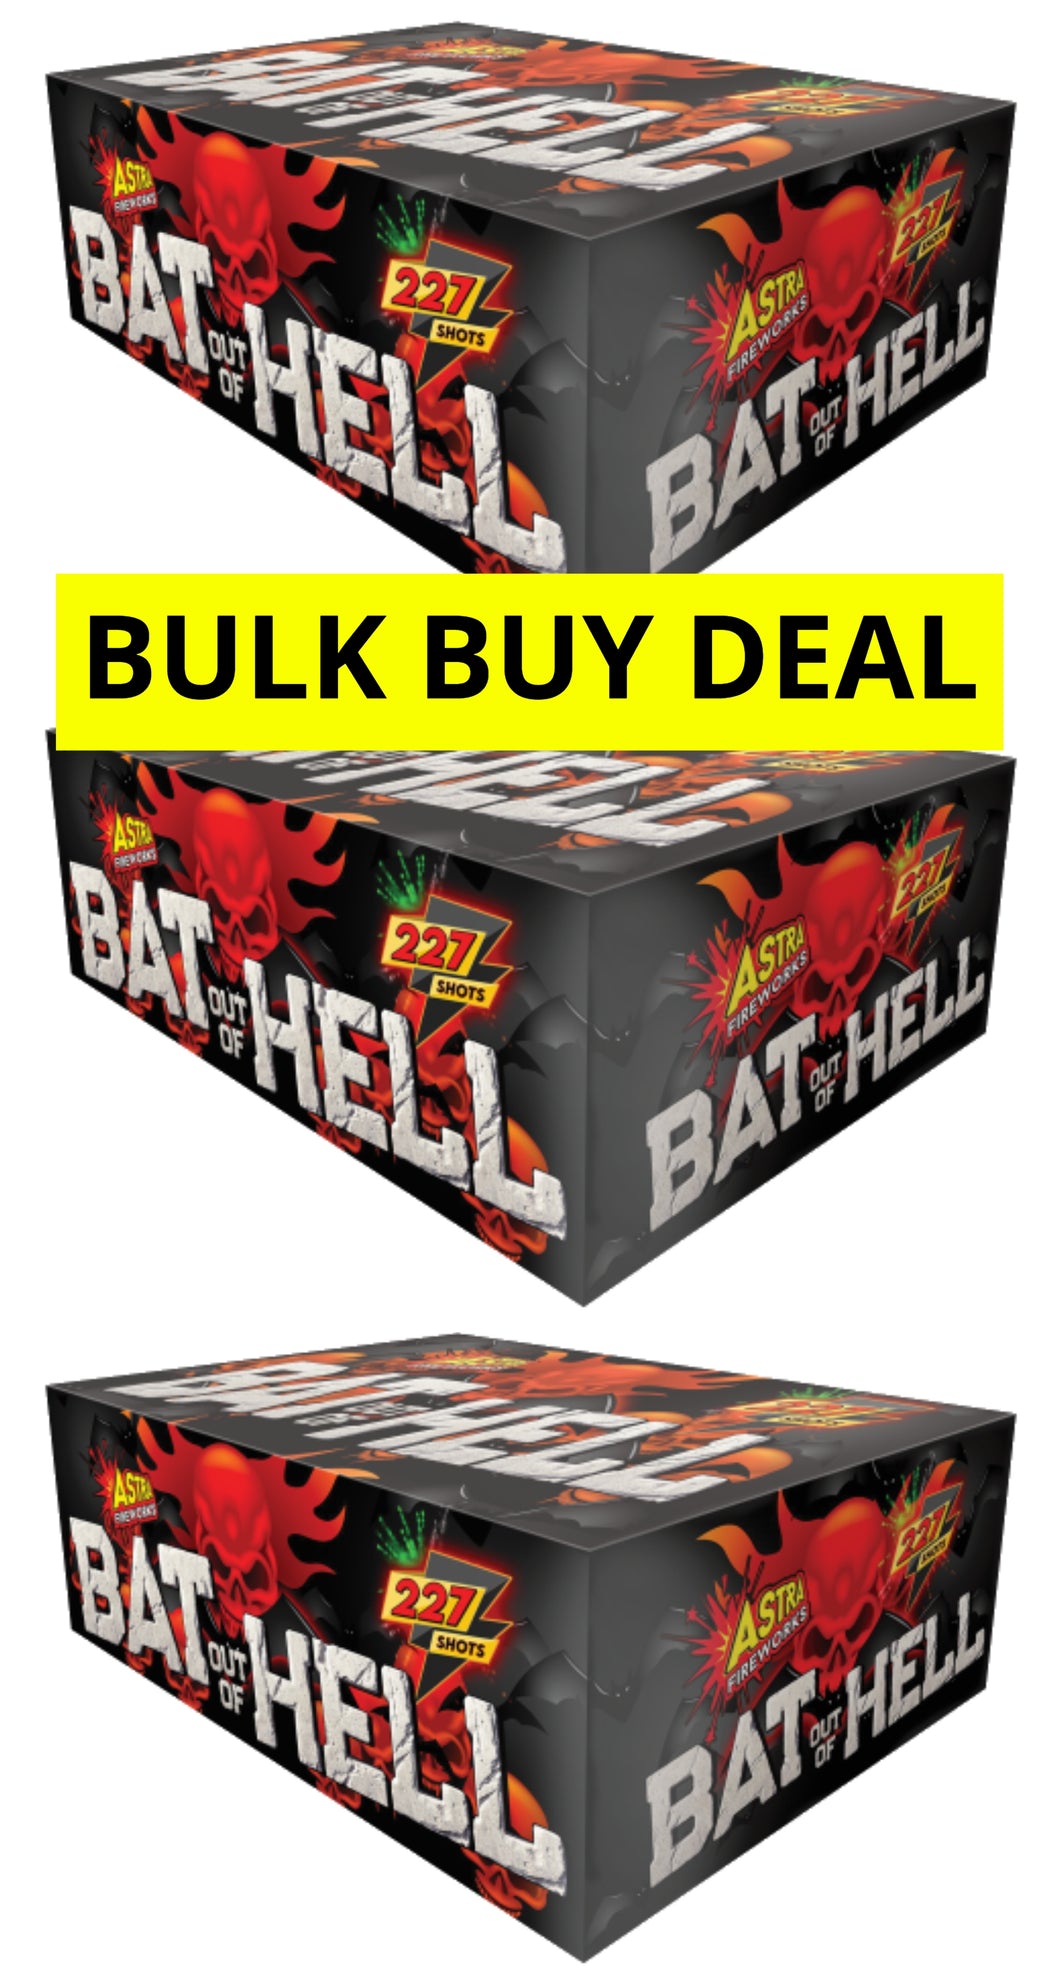 3 x BAT OUT OF HELL 227shots 1.3G COMPOUND CAKE BULK BUY (3 x £190 each including VAT) - IN STORE ONLY